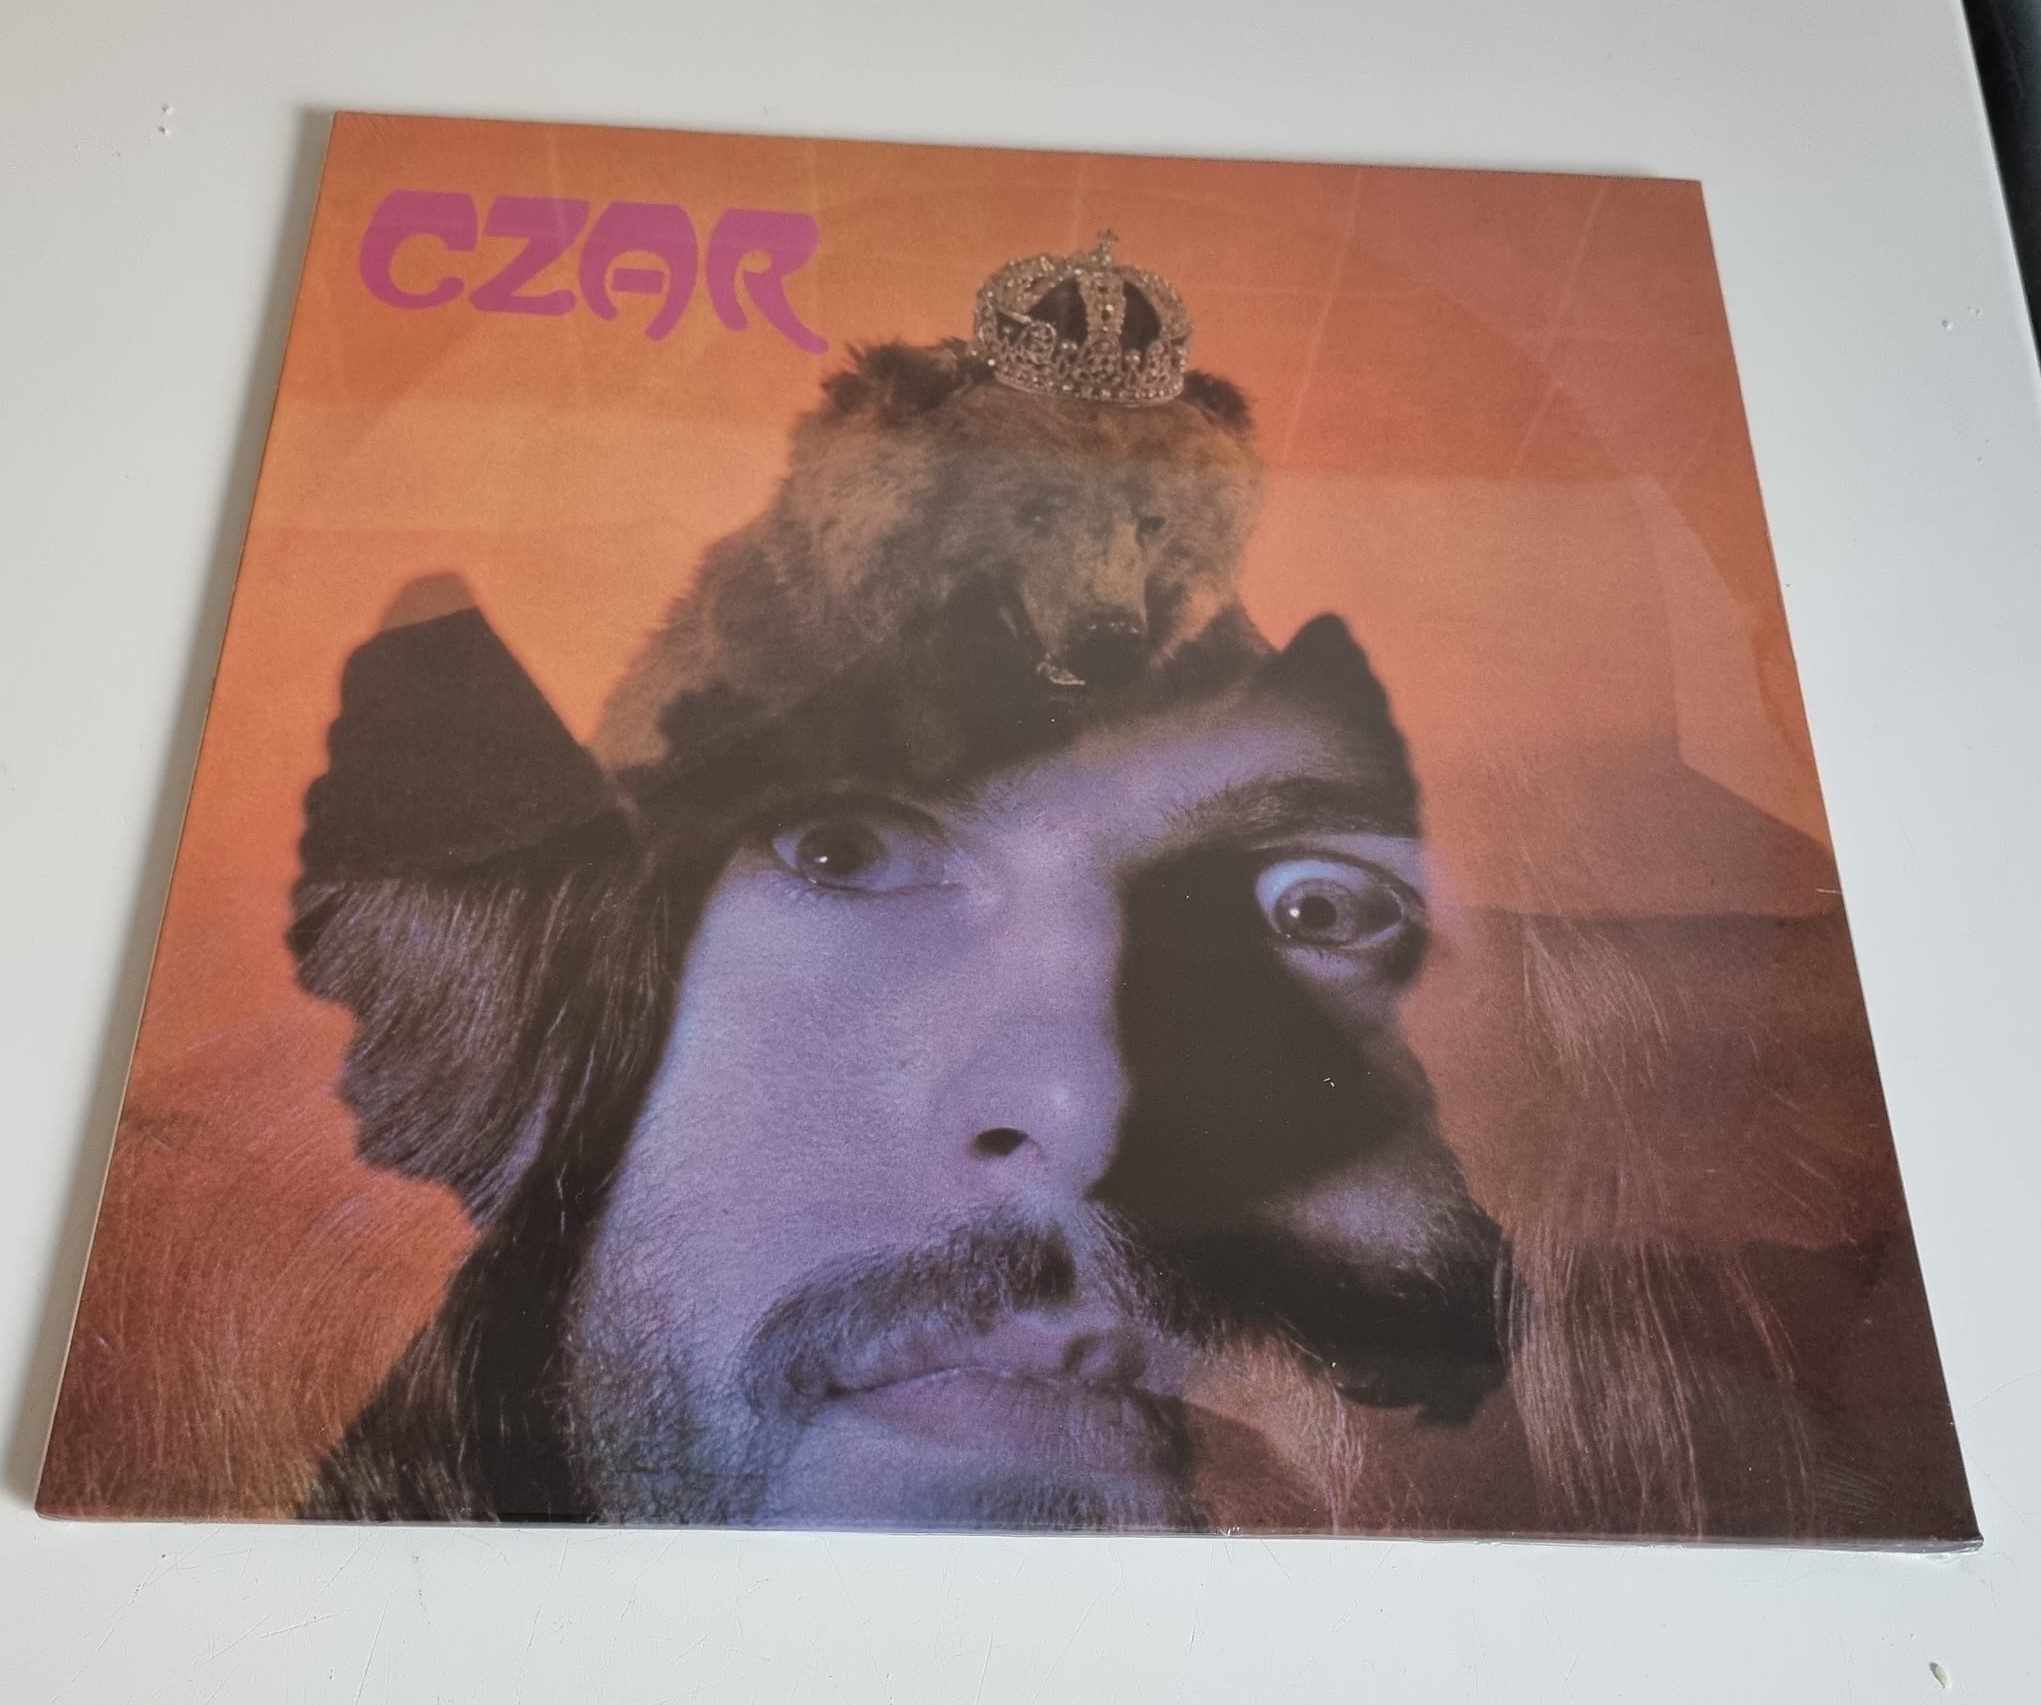 Buy this rare Czar record by clicking here